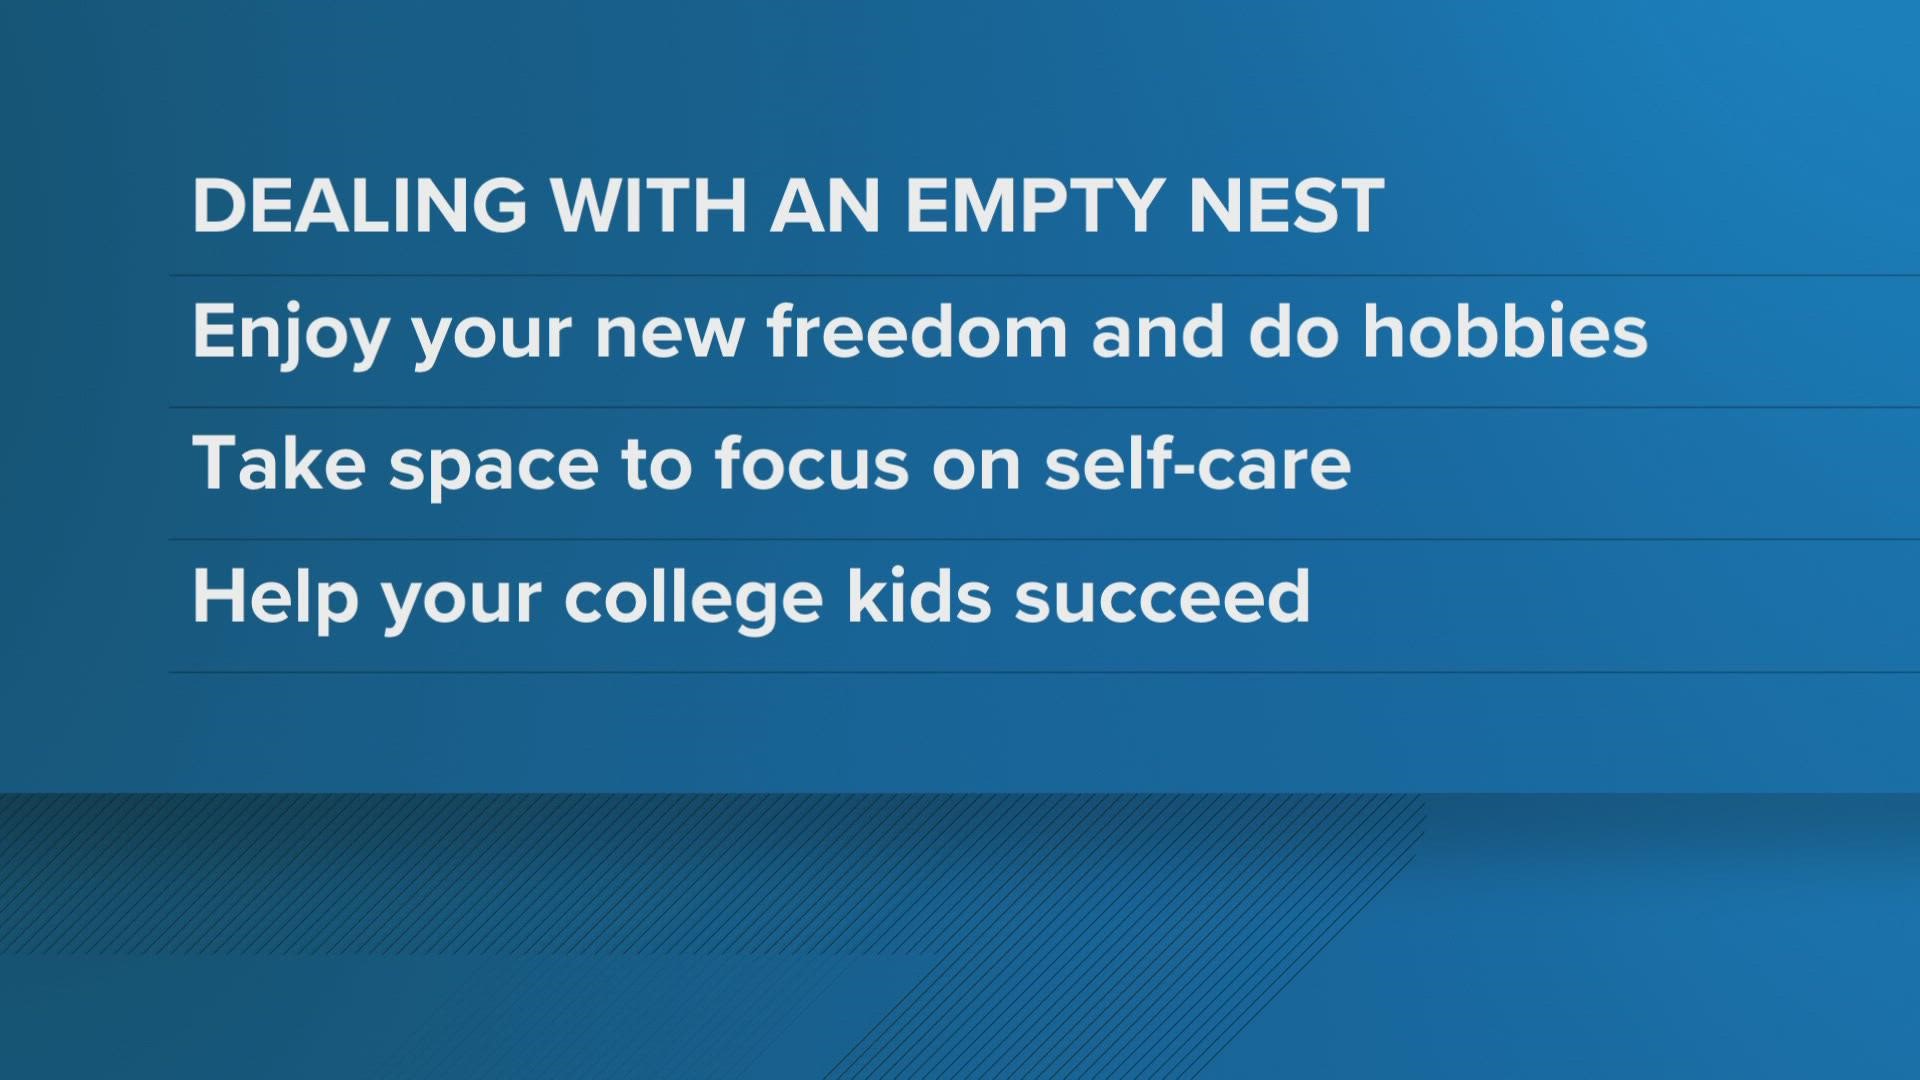 9NEWS wellness expert and psychotherapist Heather Hans has advice for parents on how to cope when their kids leave home for college.